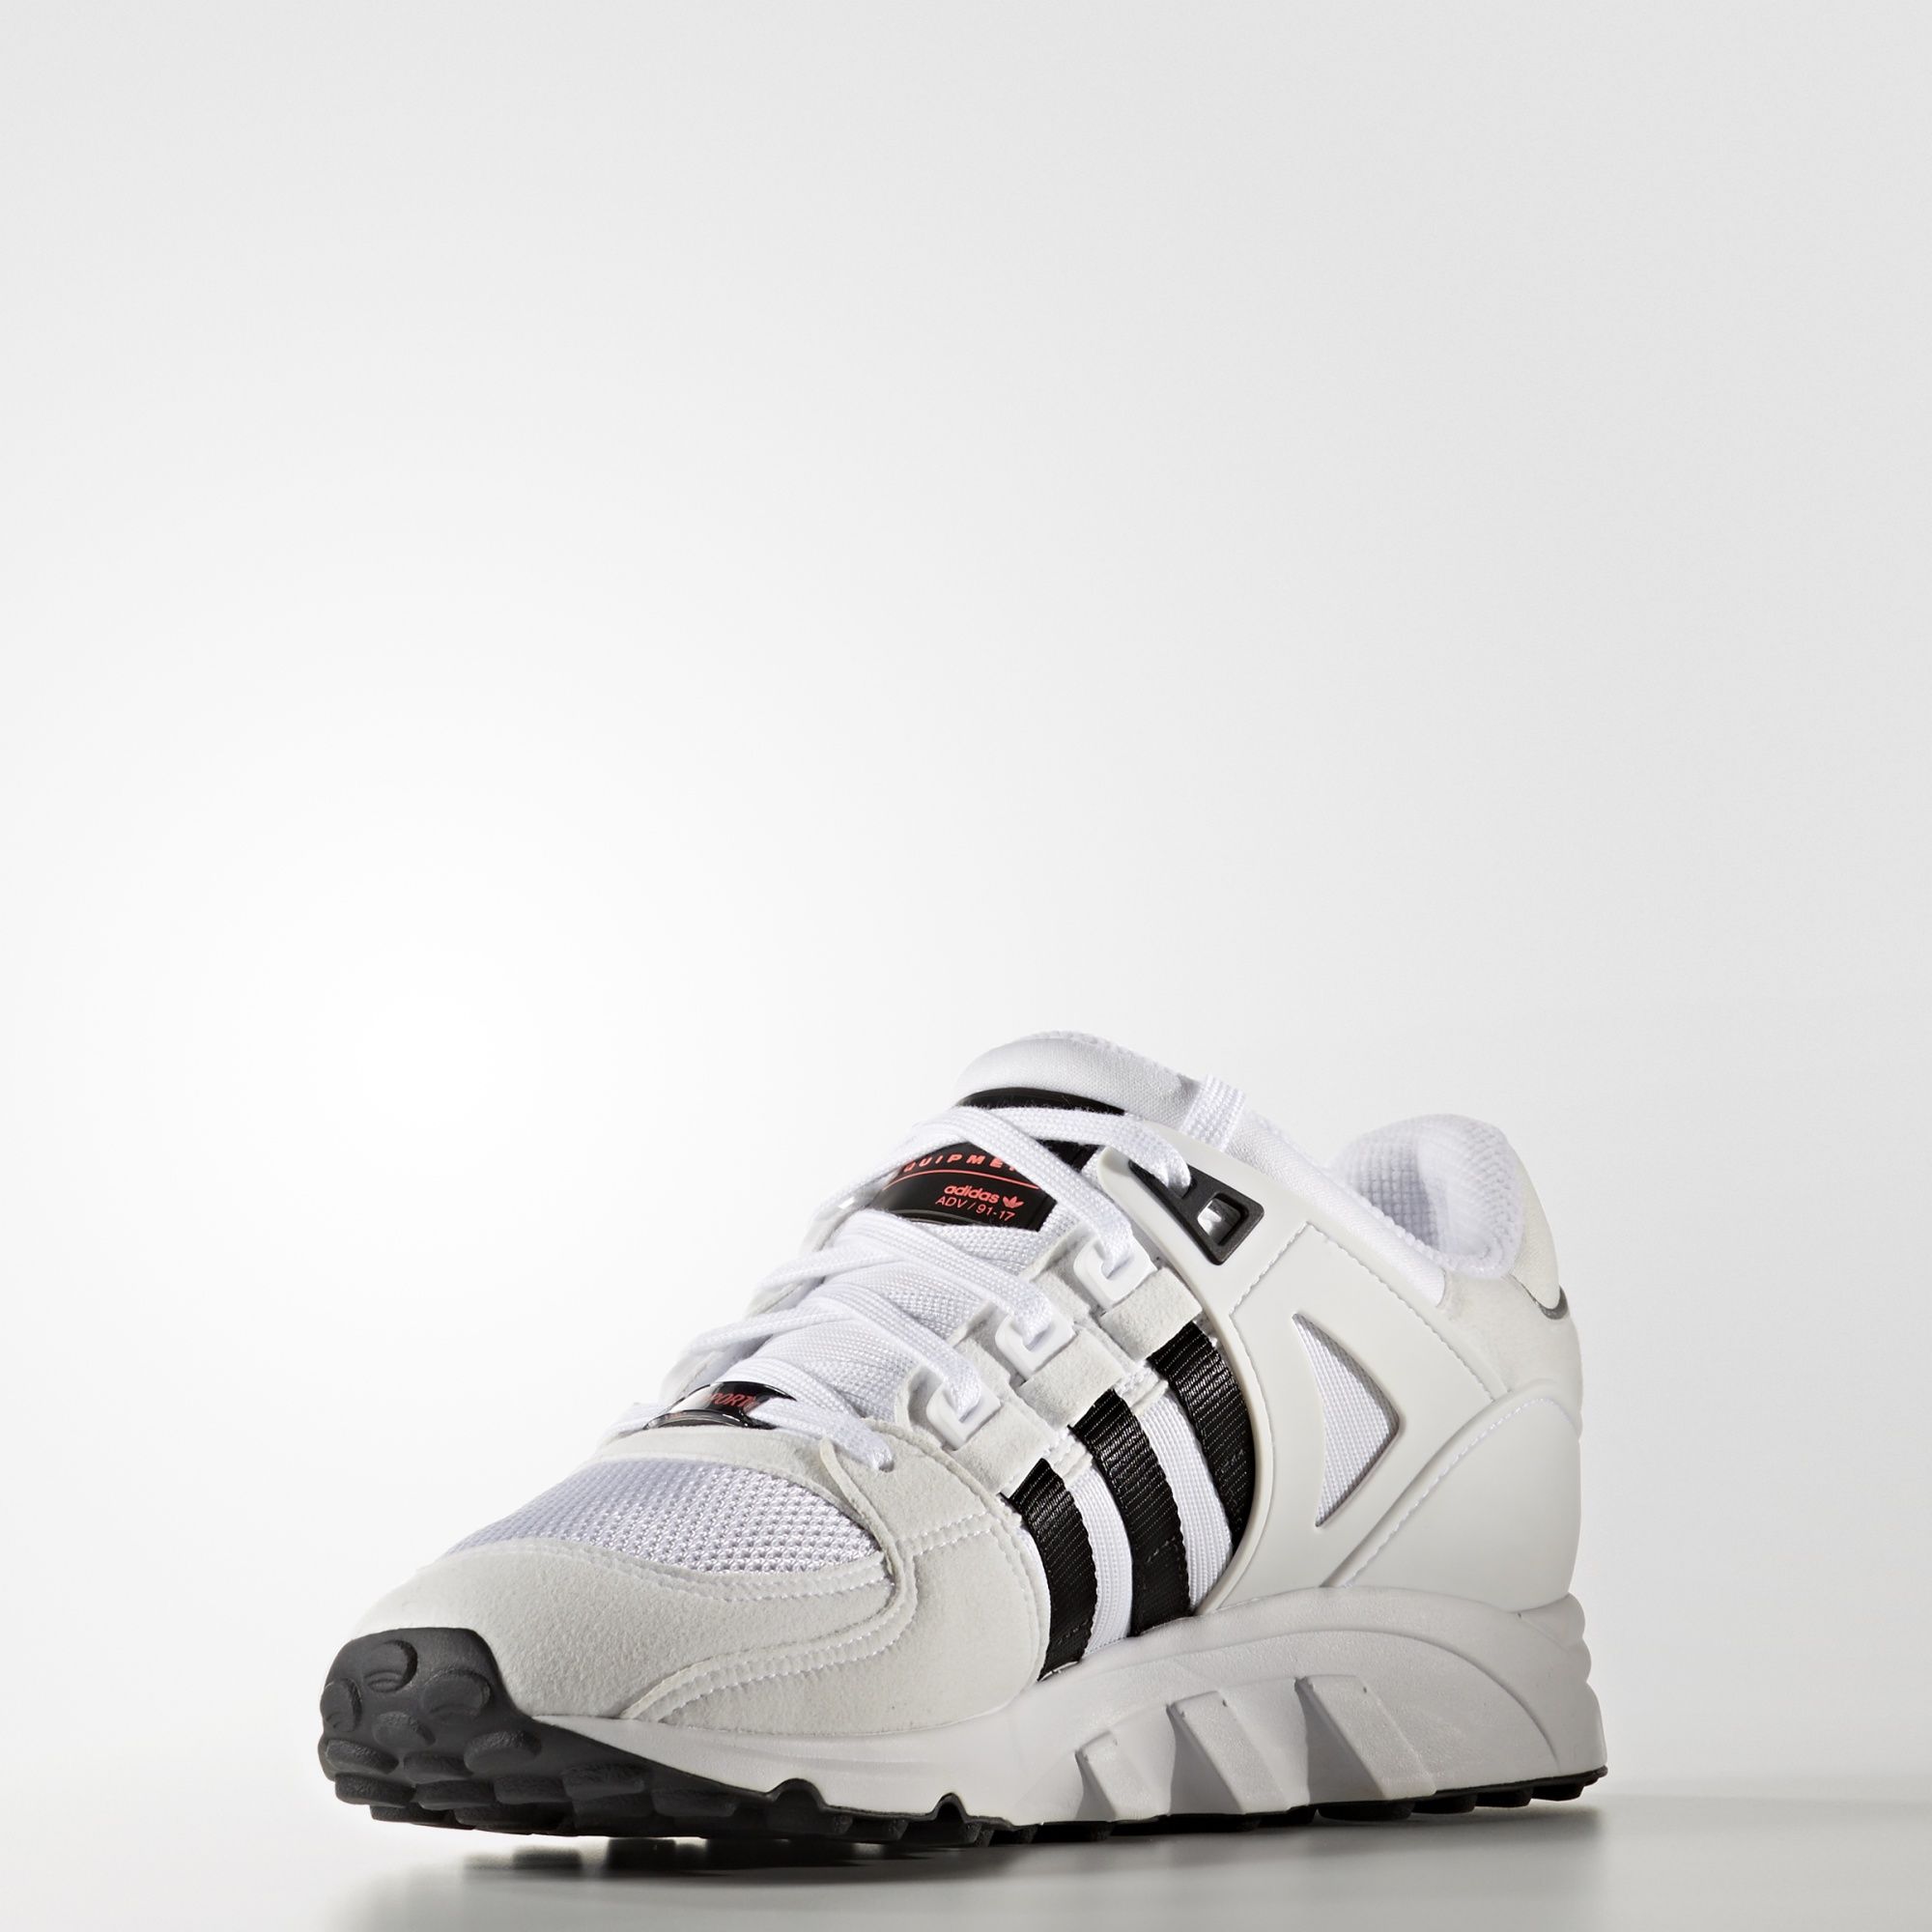 Adidas EQT Support RF
Vintage White / Core Black / Footwear White